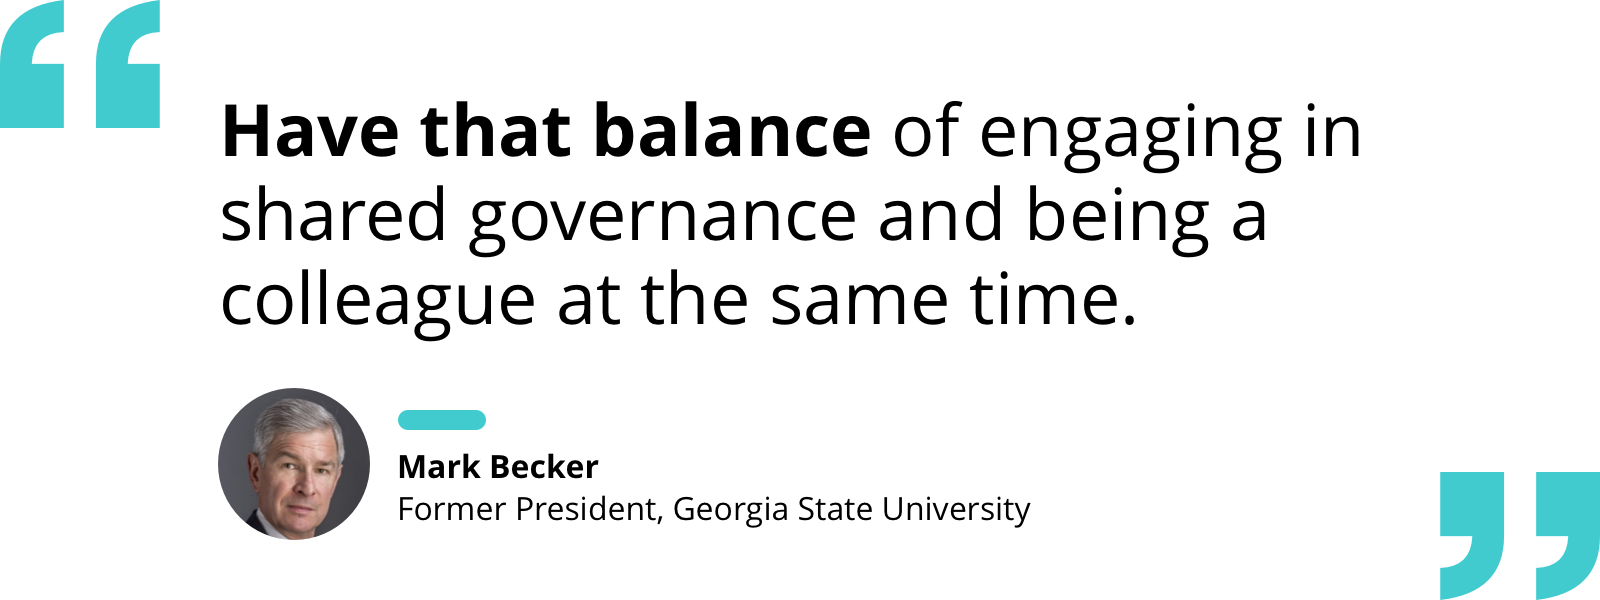 Quote by Mark Becker: "Have that balance of engaging in shared governance and being a colleague at the same time."